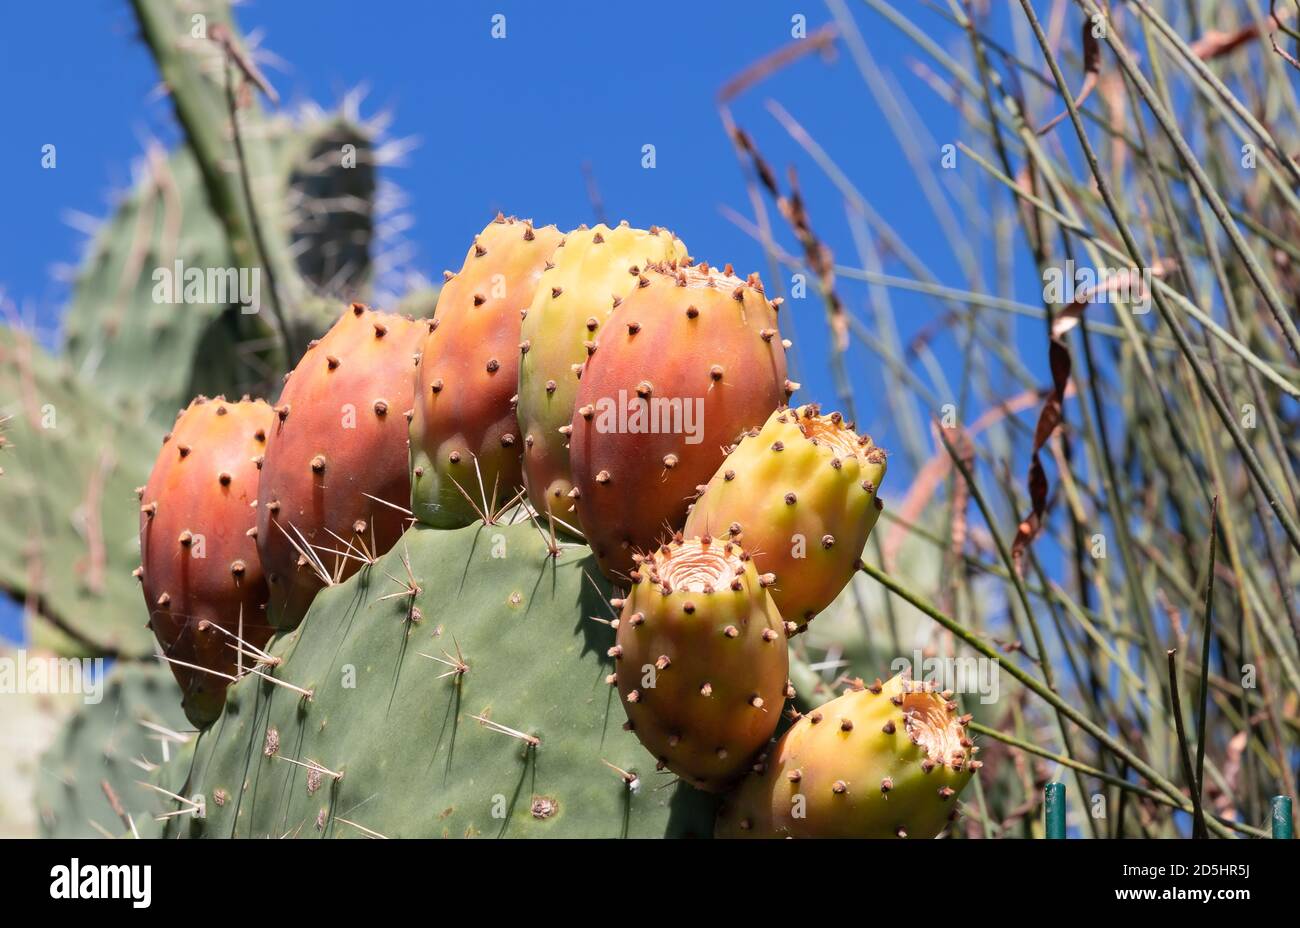 Prickly pear cactus close up with fruit in red color. Opuntia, commonly called prickly pear, is a genus in the cactus family, Cactaceae. Prickly pears Stock Photo